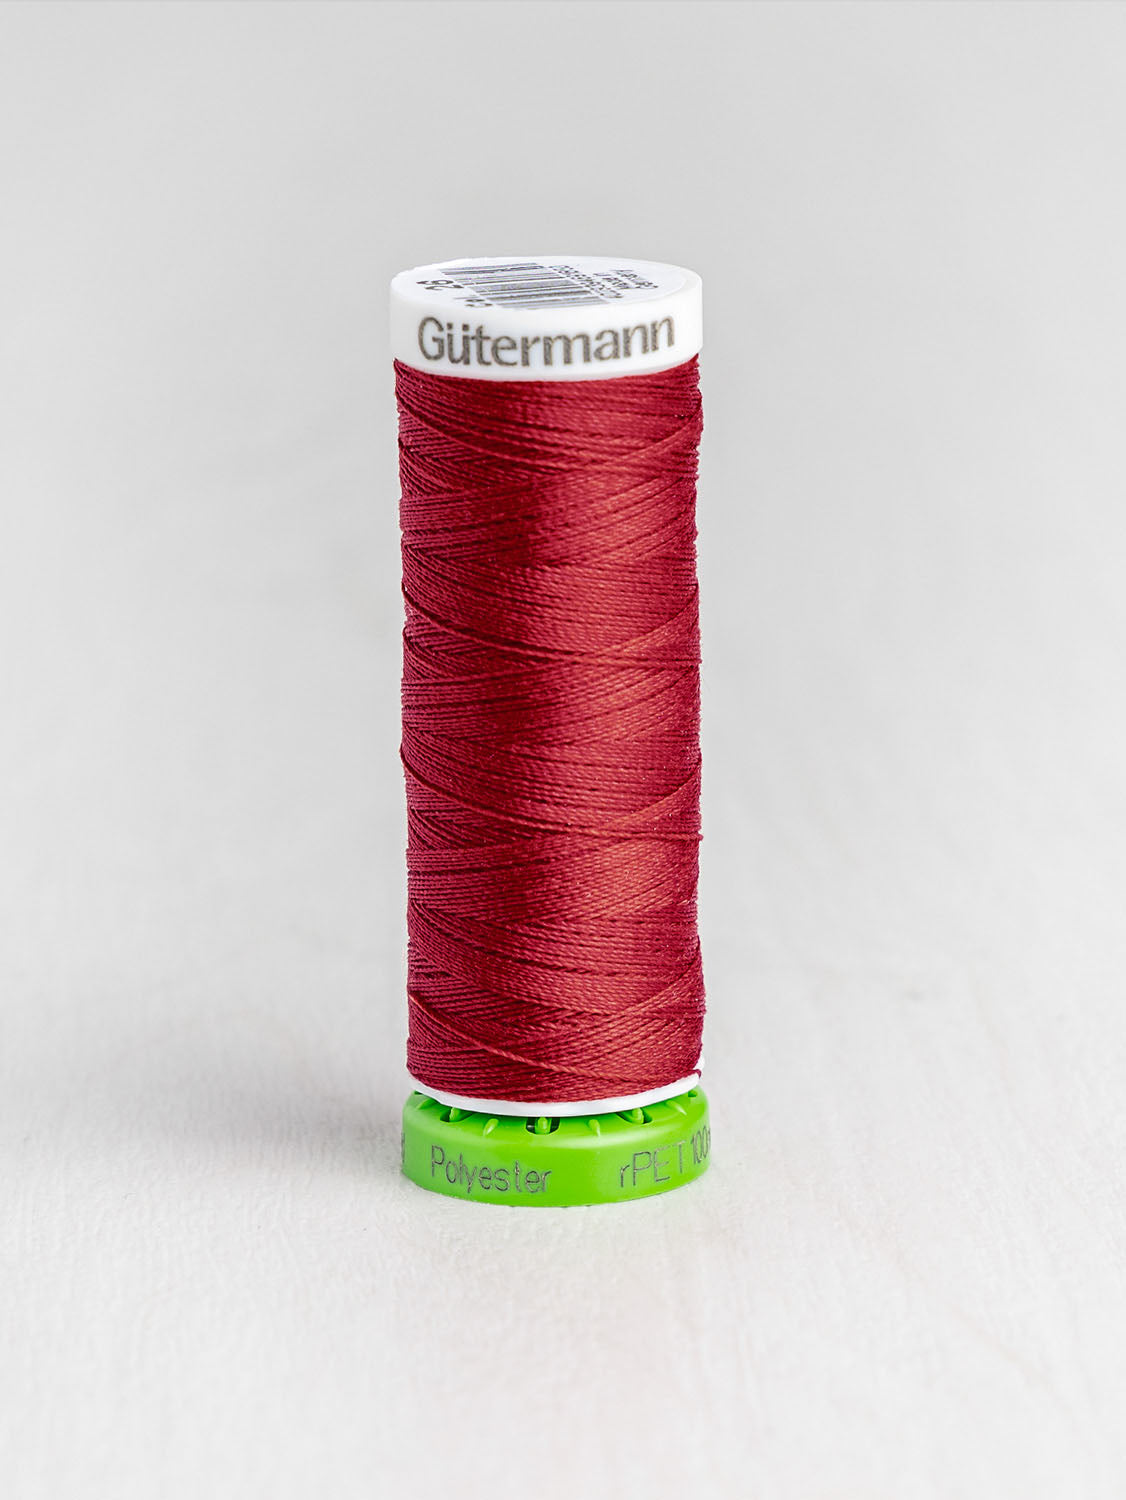 Gütermann All Purpose rPET Recycled Thread - Currant 026 | Core Fabrics